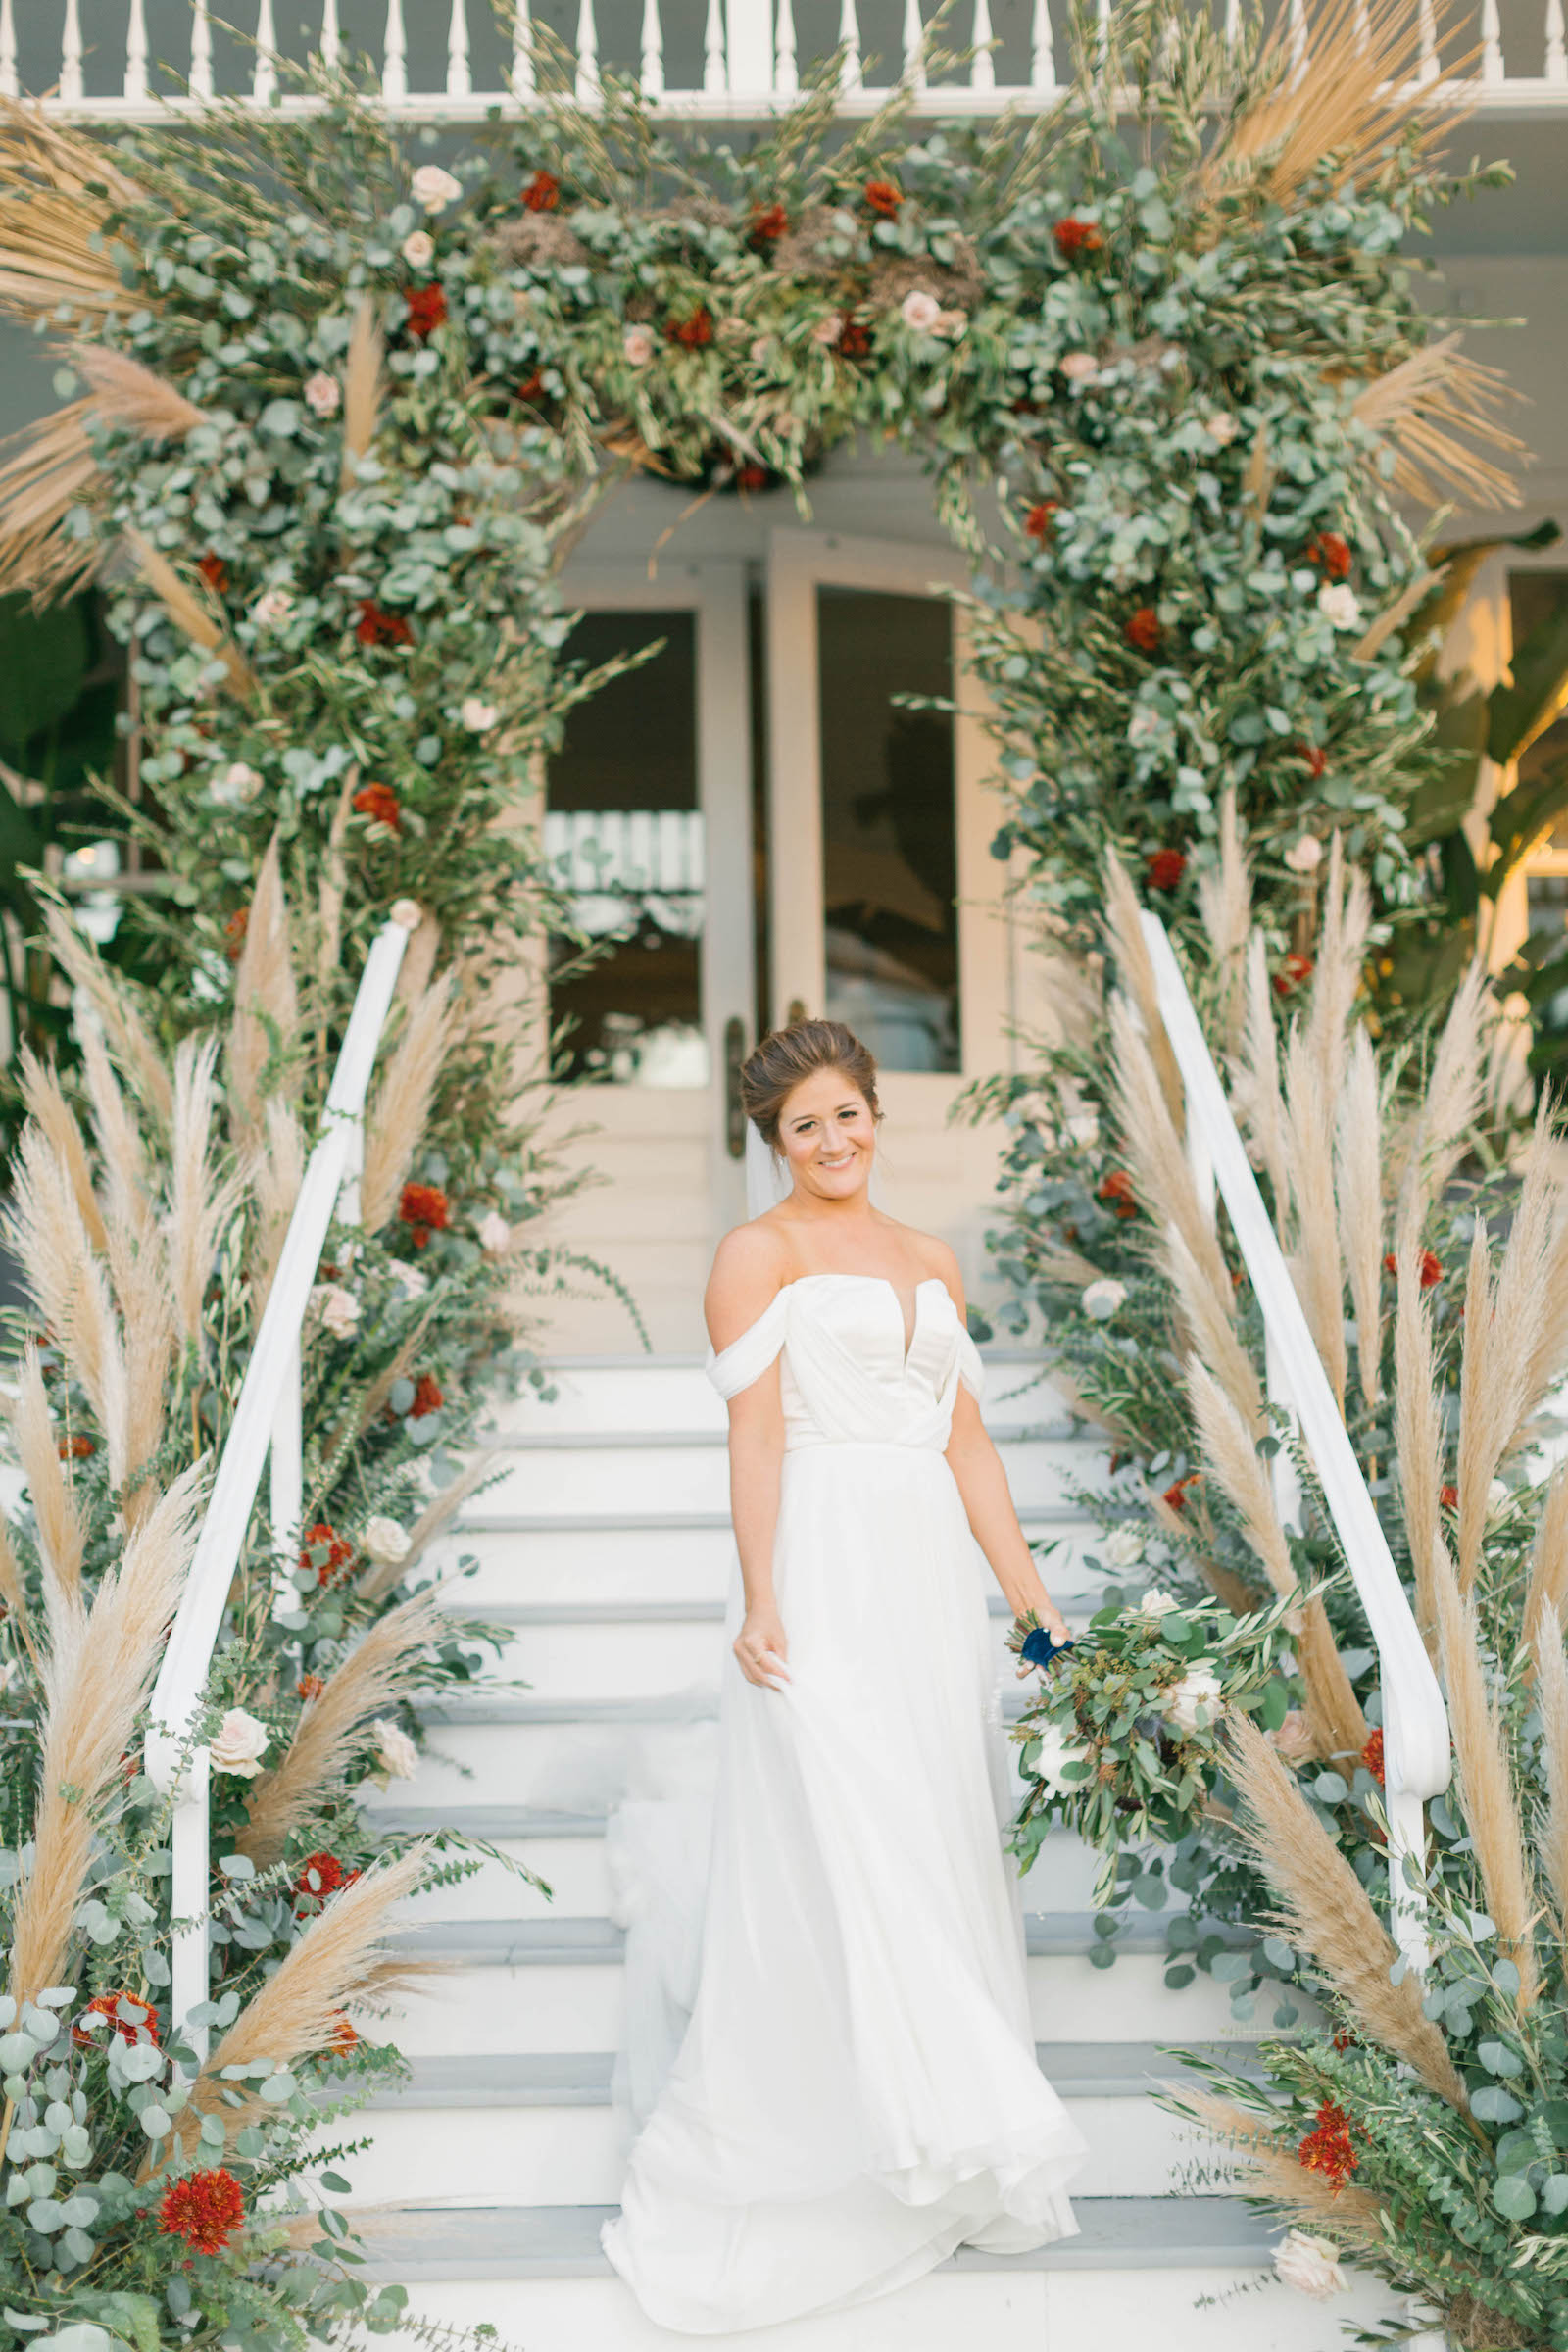 Boho Garden Wedding Ceremony Decor, Lush Greenery Eucalyptus, Dried Palm Leaves and Red, Blush Pink Floral Arch with Pampas Grass Arrangements, Bride Standing On Staircase of Florida Mansion Wedding Venue Belleview Inn | Tampa Bay Wedding Planner Parties A'la Carte